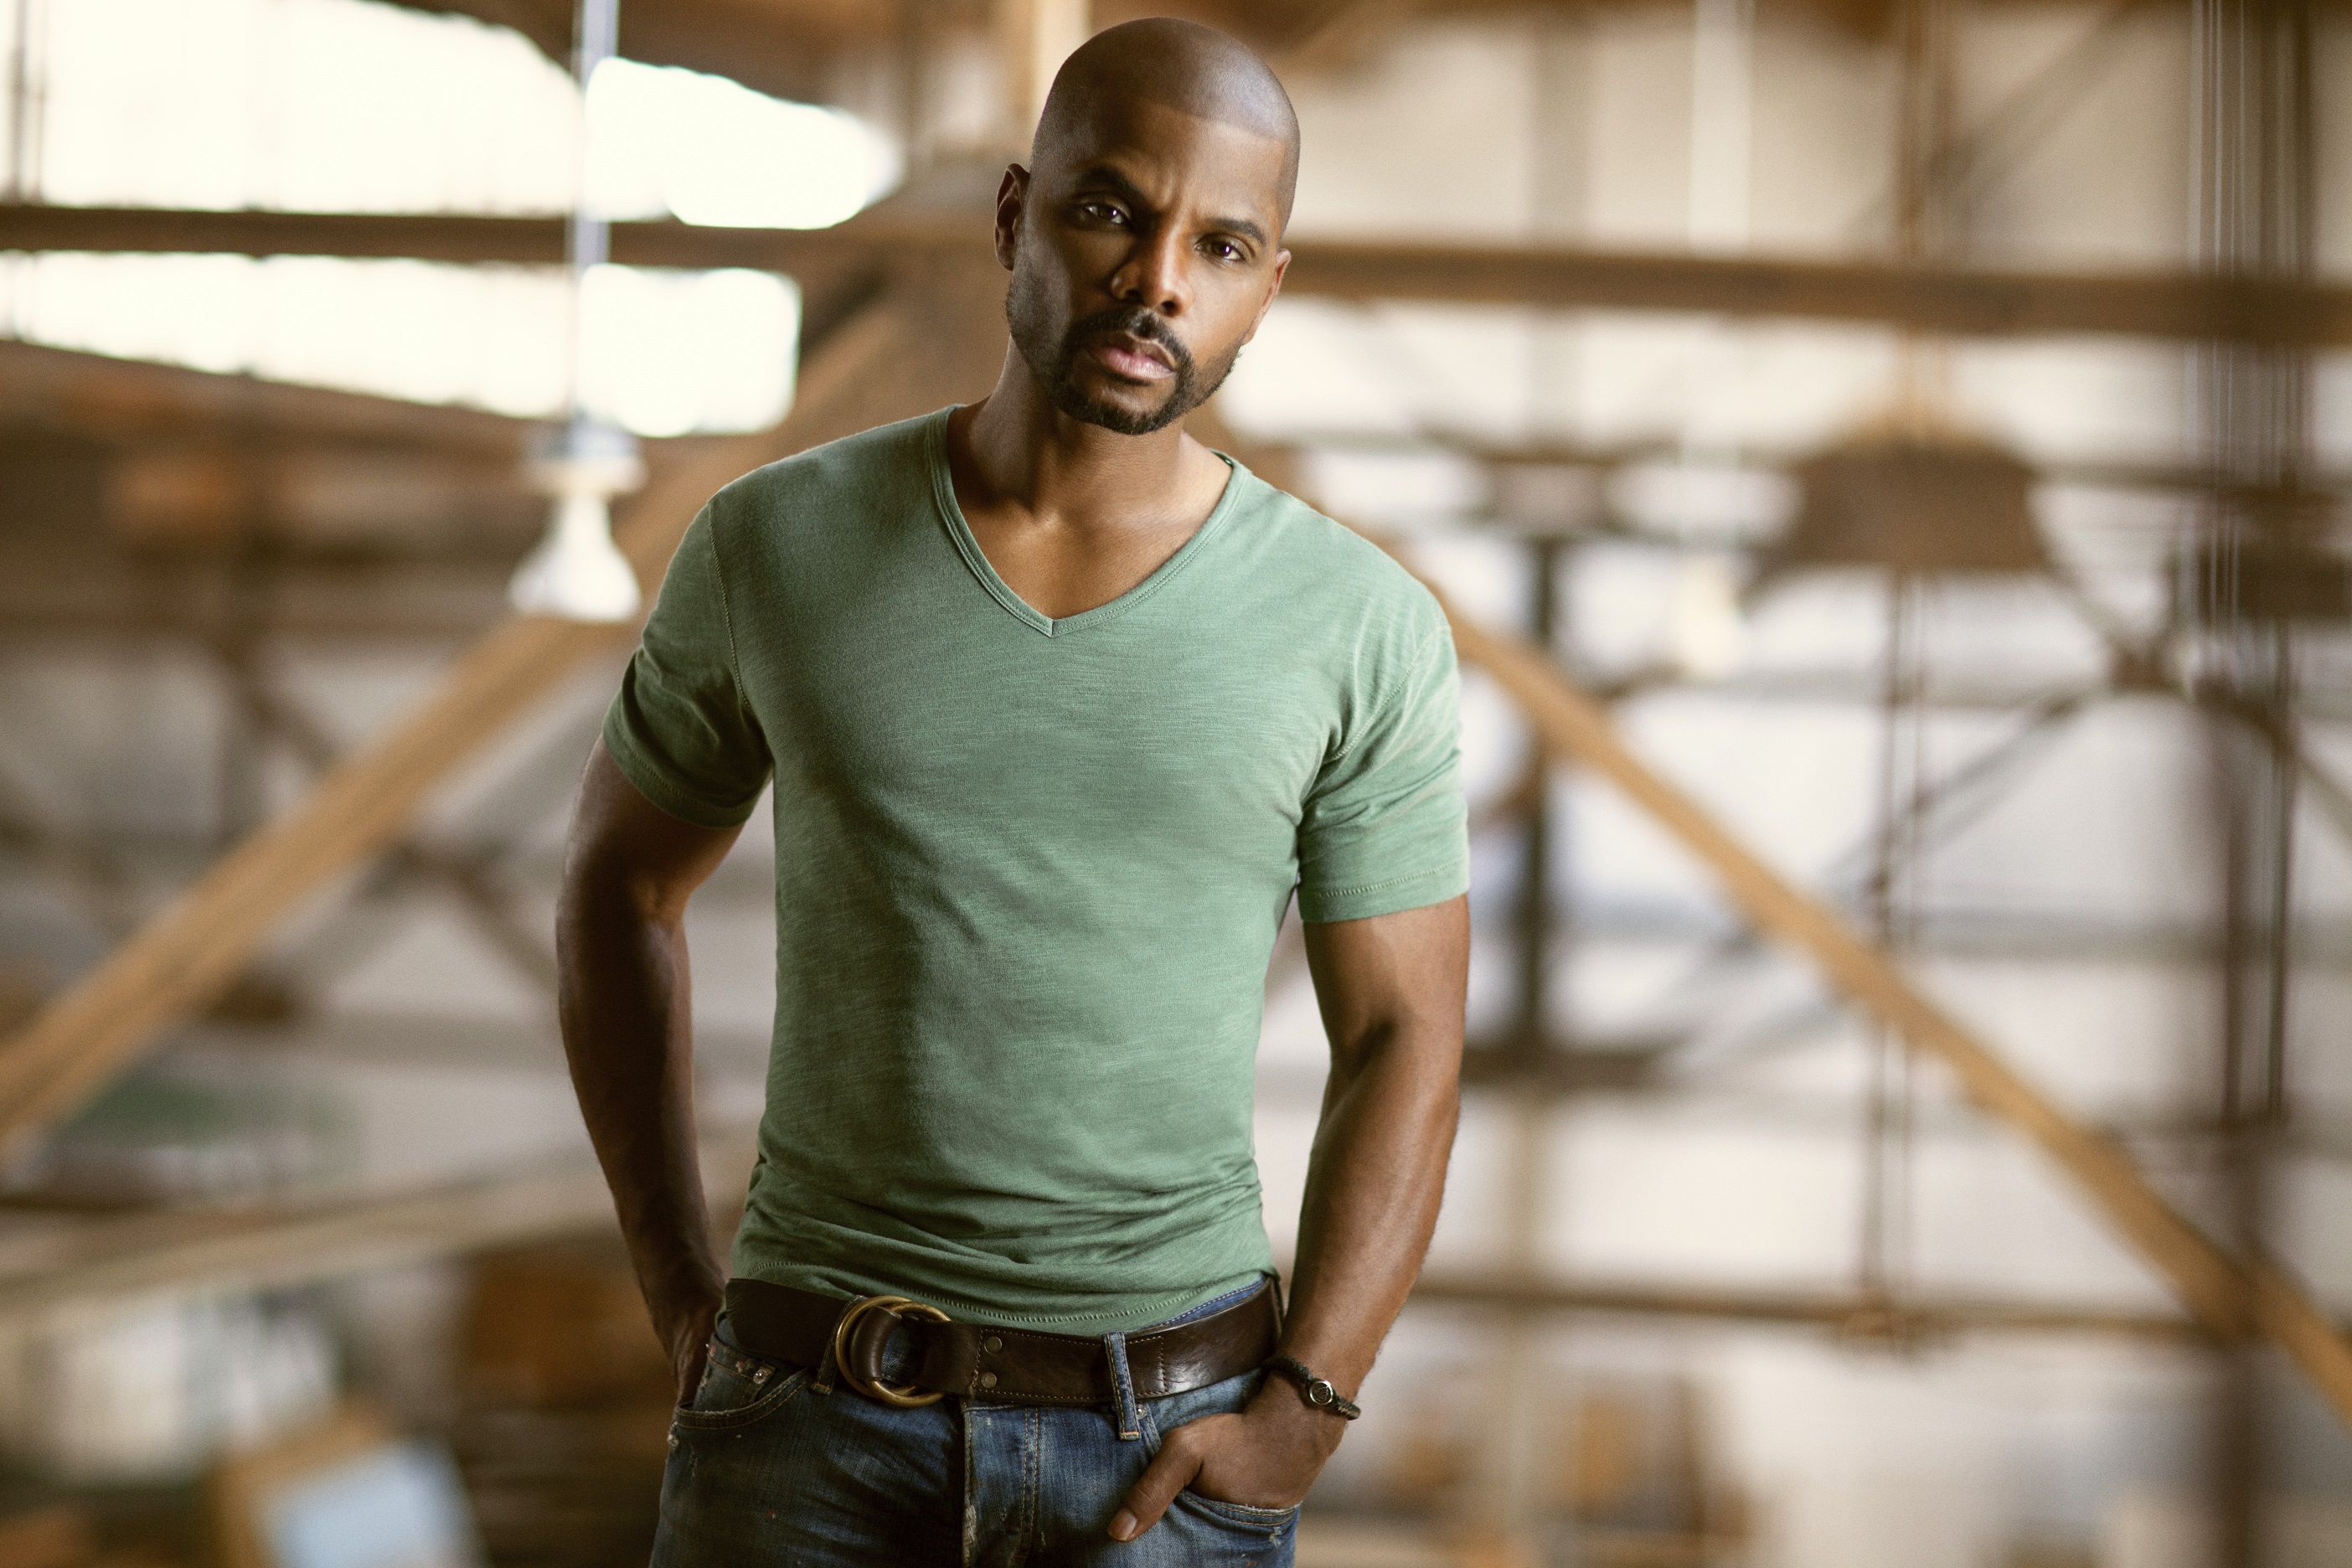 Multi-Grammy Award-winner Kirk Franklin tops charts again with 11th No. 1 hit album Losing My Religion 1